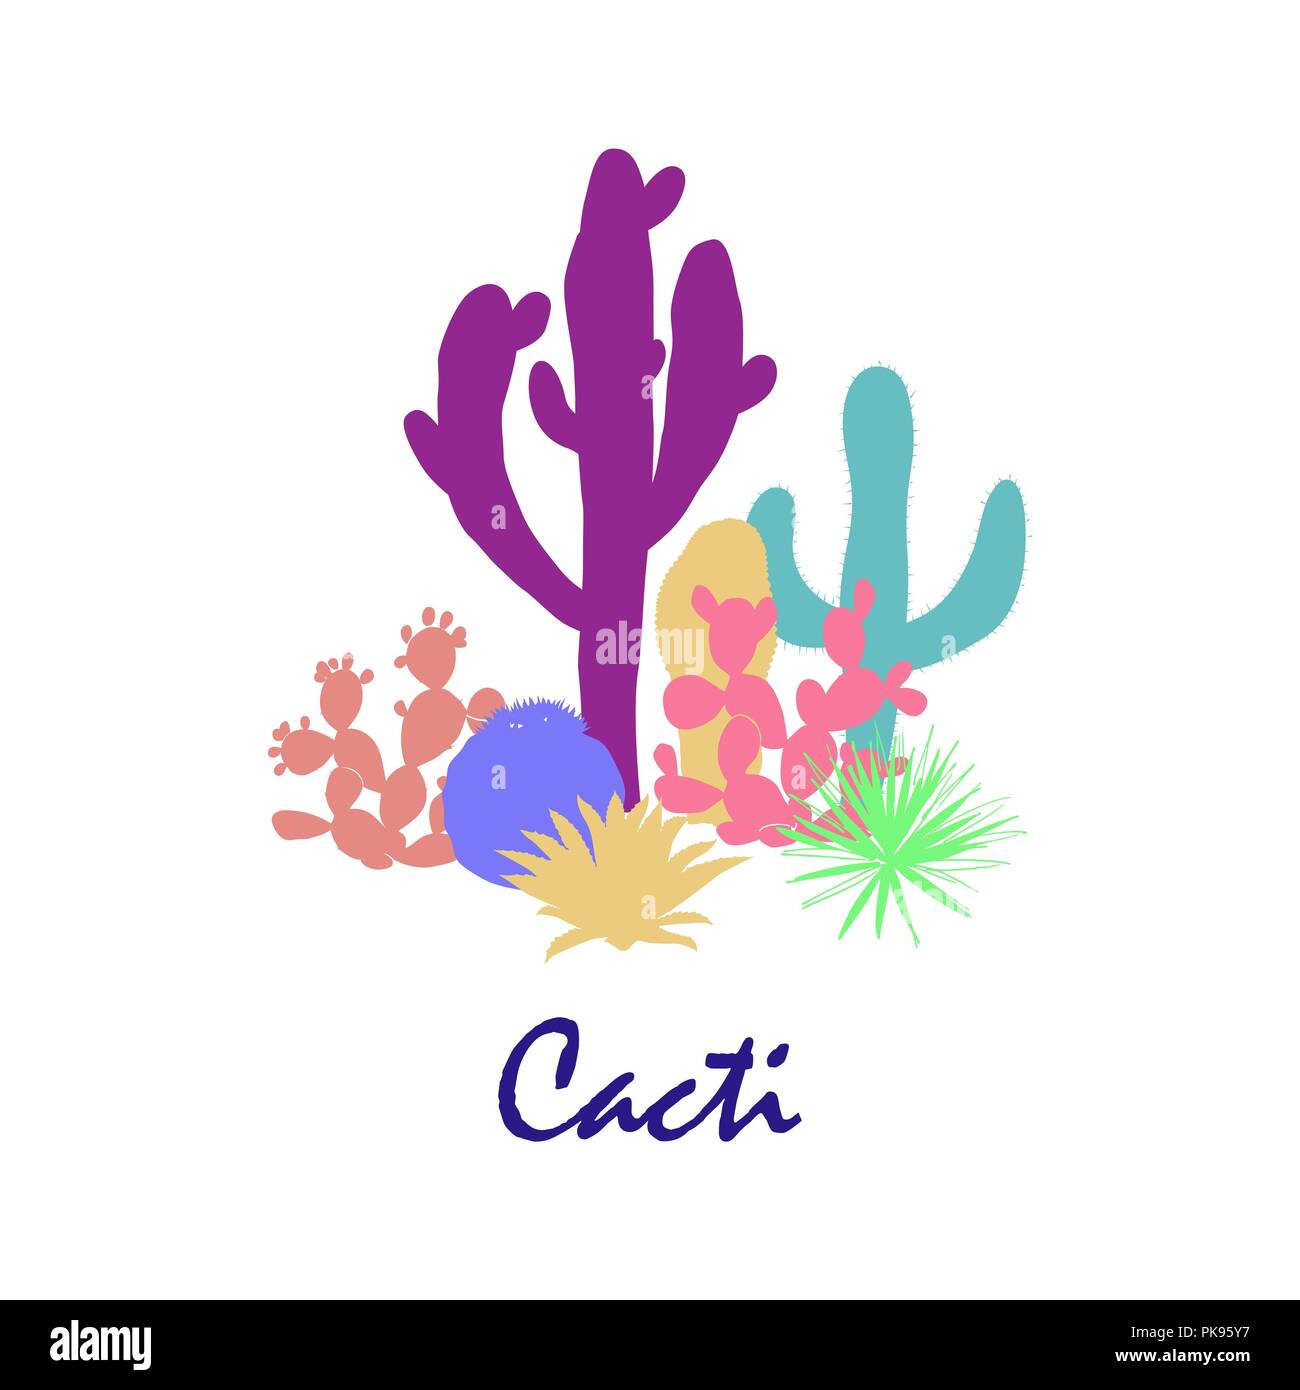 Cacti group. Prickly pear cactus, blue agaves, and saguaro. Stock Vector